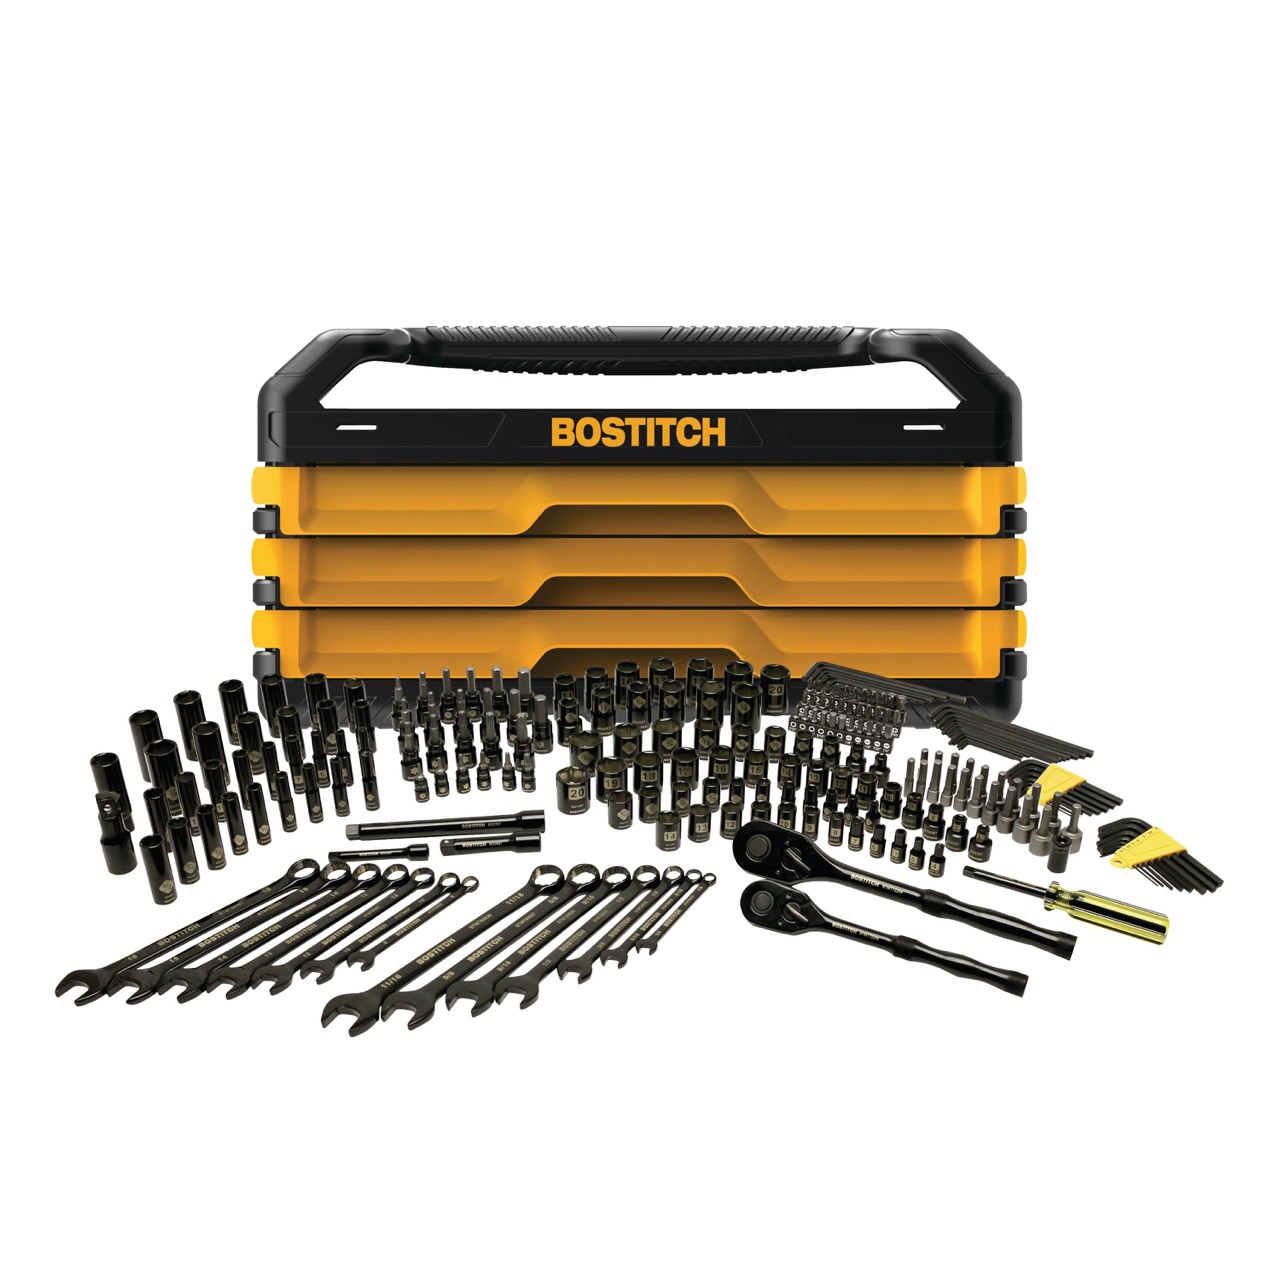 Who Makes Bostitch Hand Tools